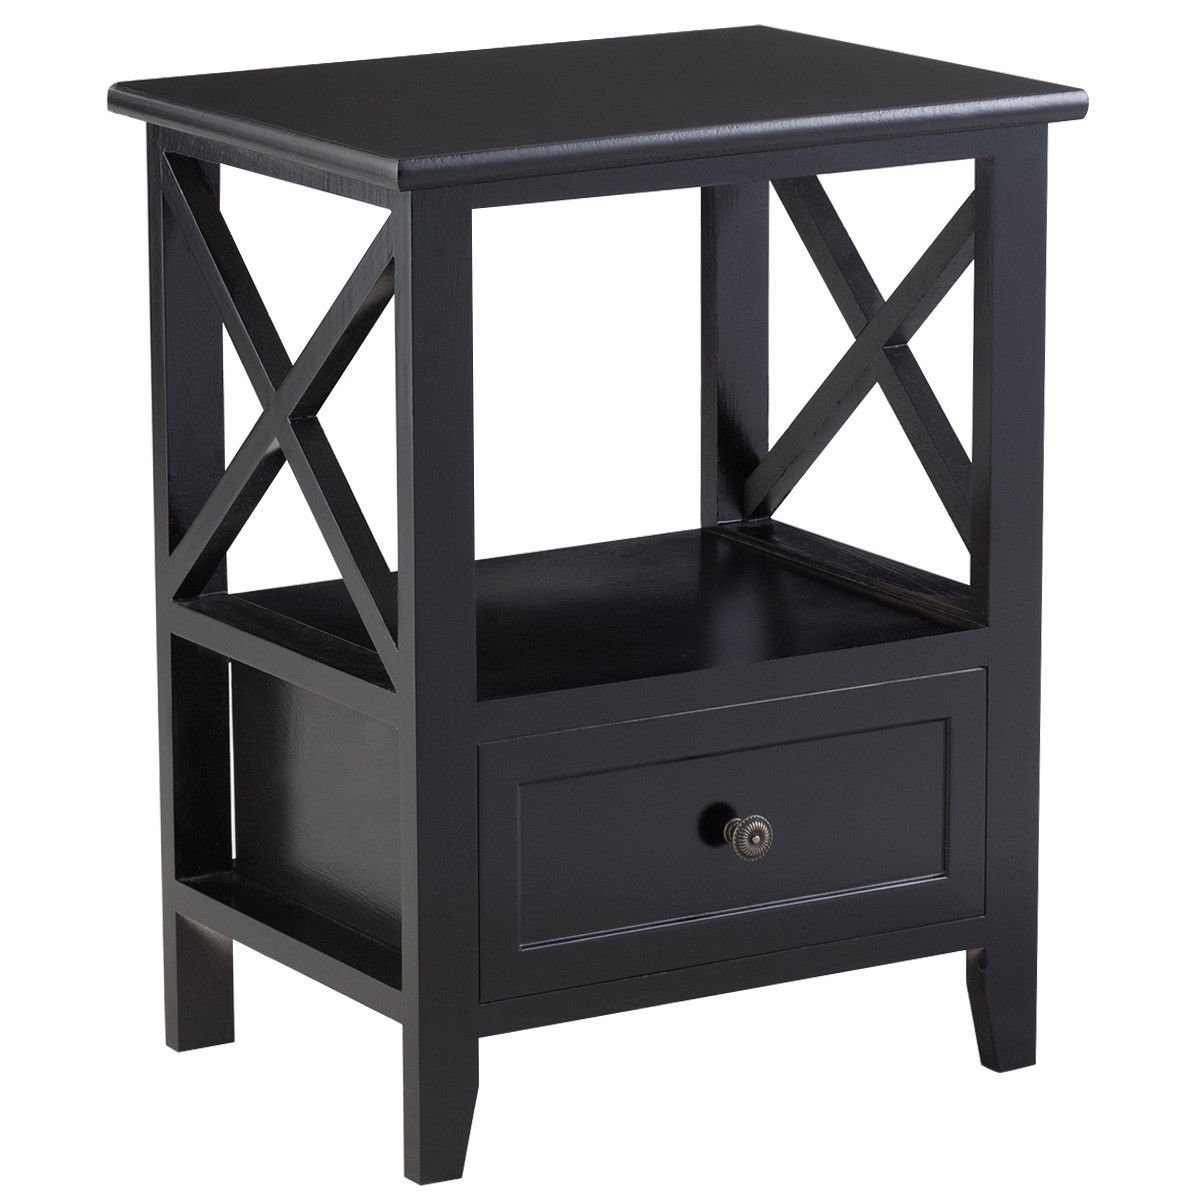 giantex end table night stand storage shelf with drawer timmy nightstand accent black wood home bedroom bedside furniture kitchen dining light blue marble top corner dale tiffany